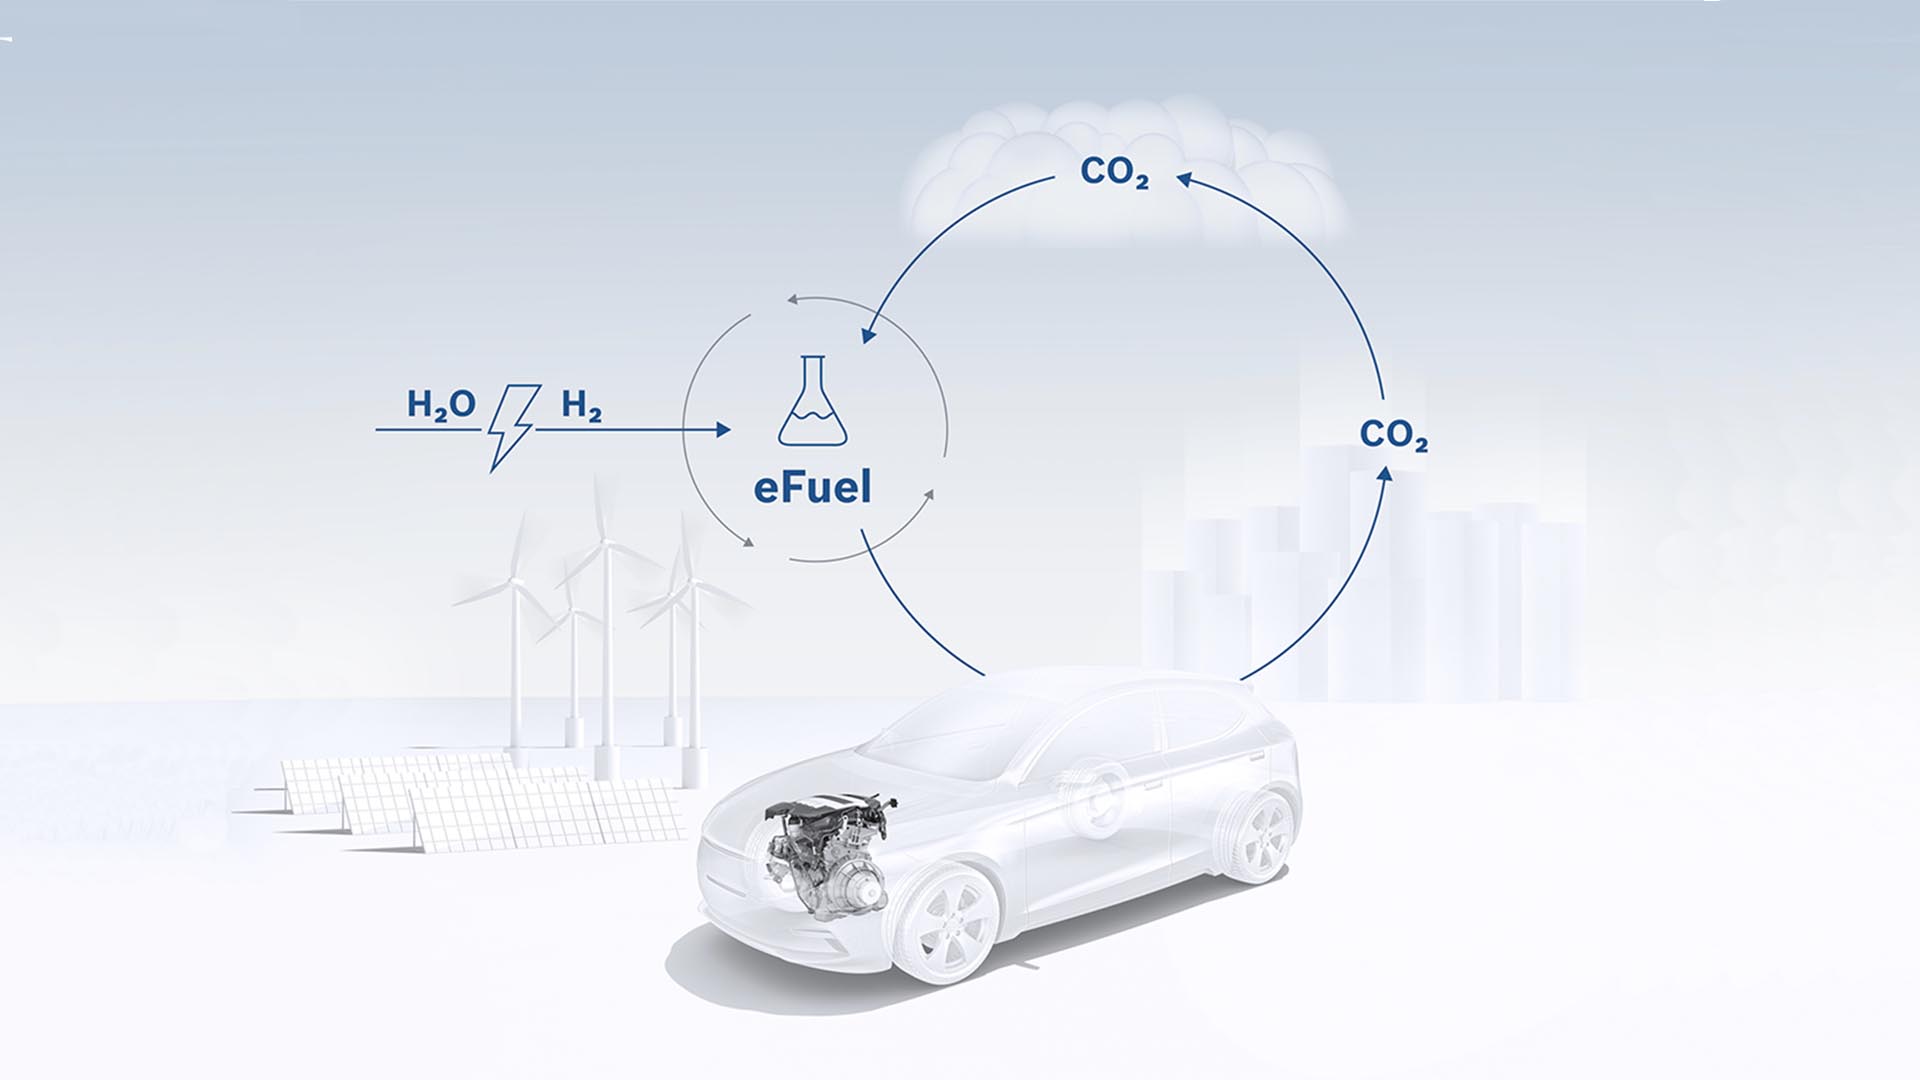 The synthetic fuel production cycle consumes a lot of energy, but it is 100% renewable, while electricity still generates CO2 emissions in most power plants around the world.